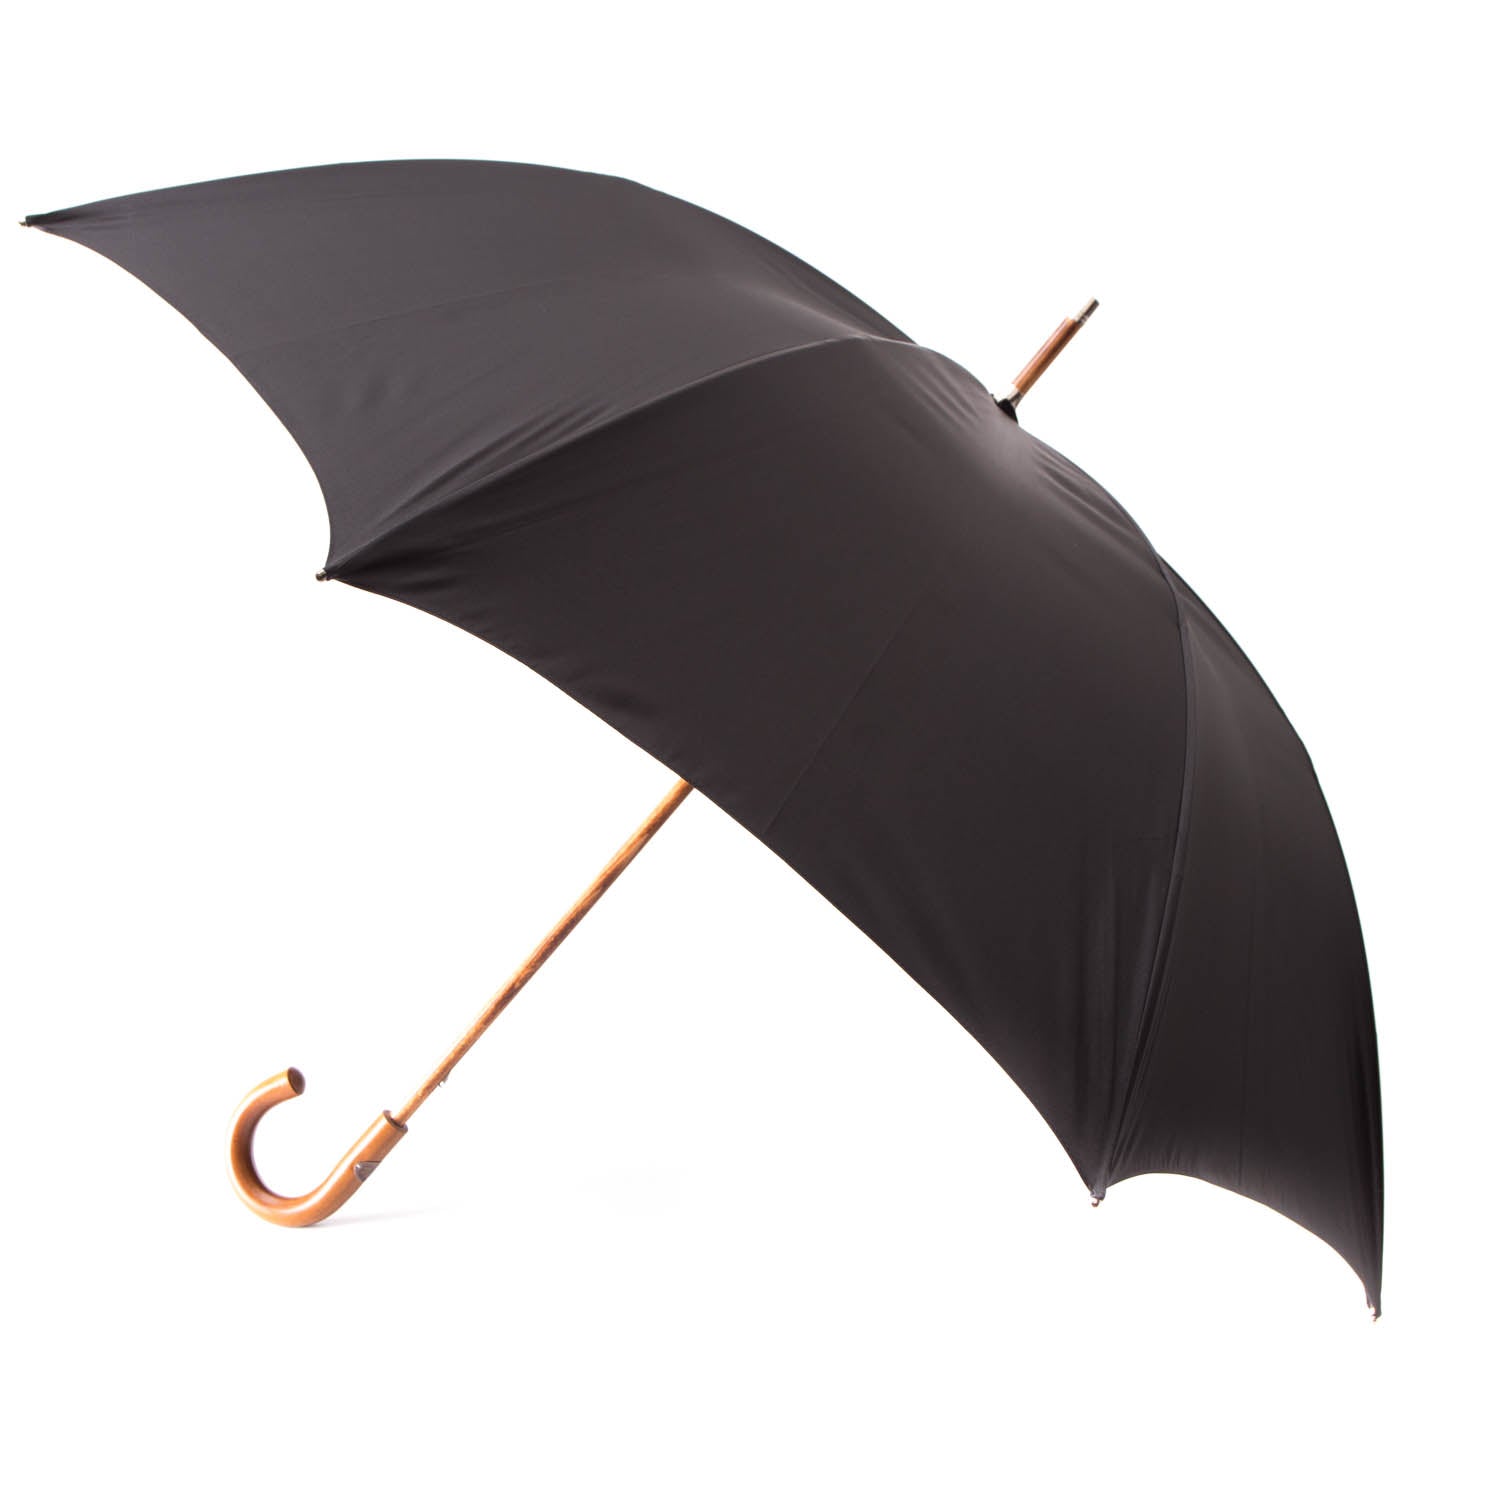 A black umbrella with a wooden Malacca handle on a white background would be a "Black Doorman Umbrella with Malacca Handle" by KirbyAllison.com.